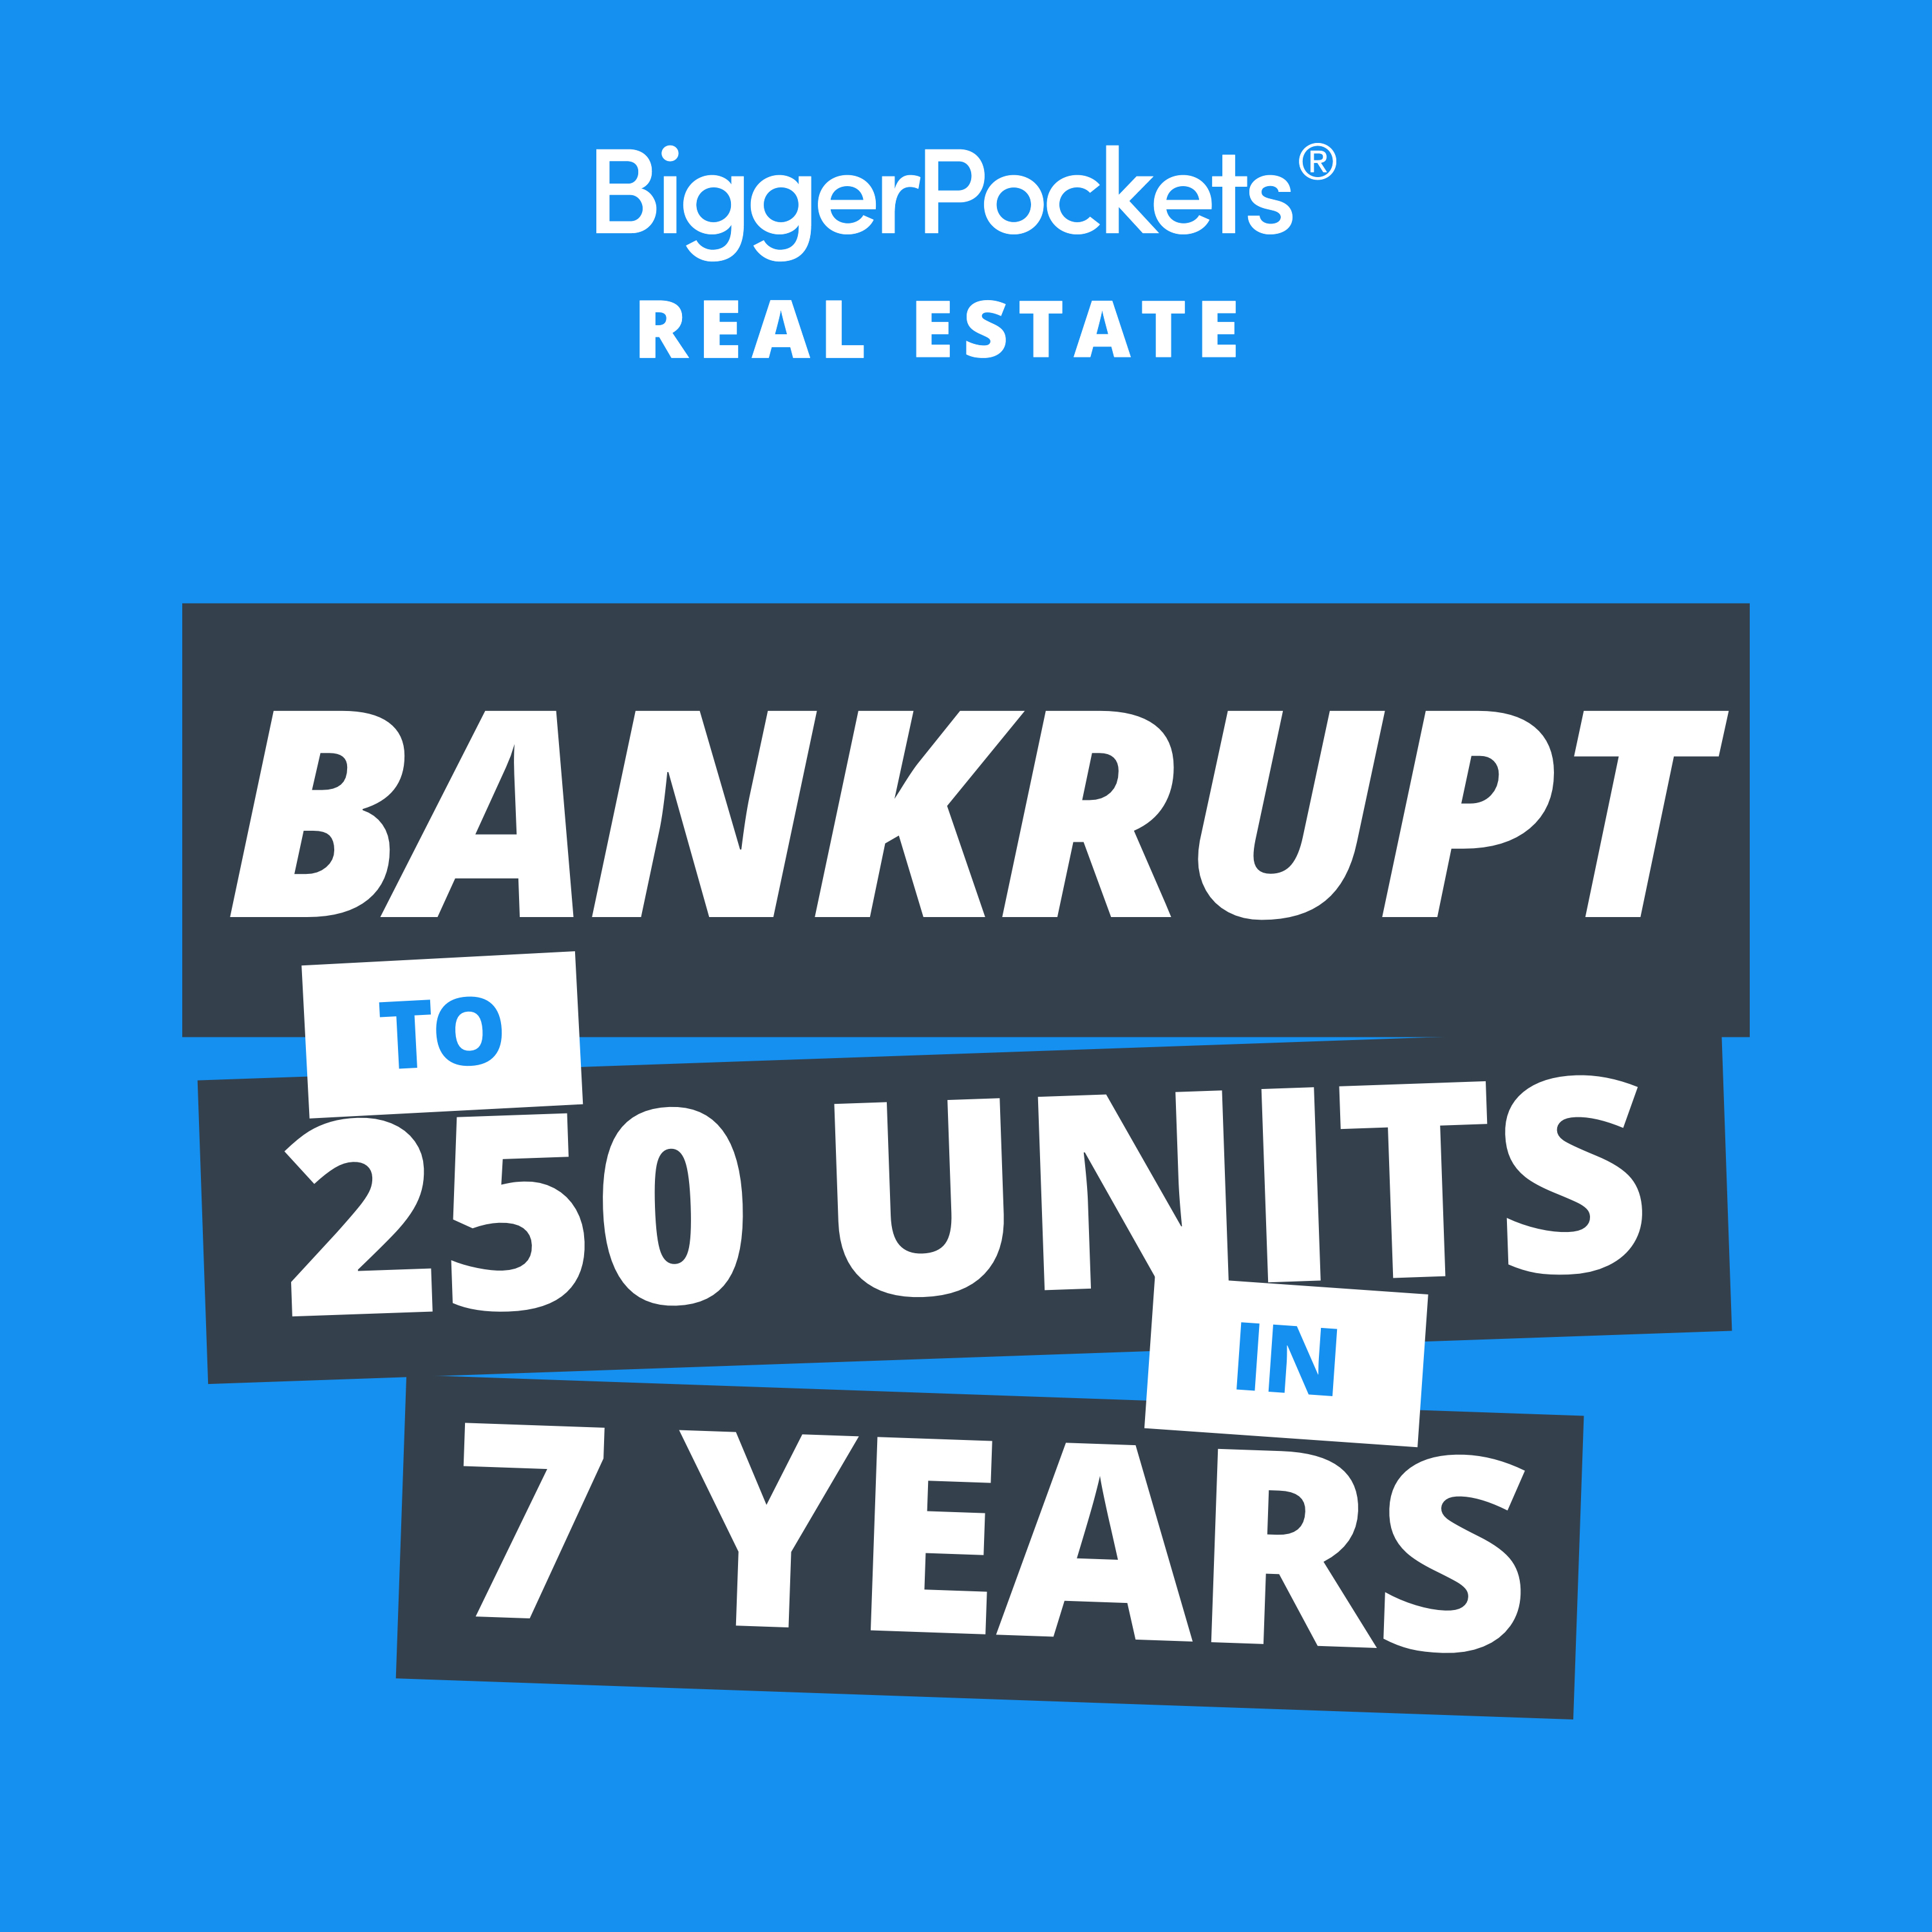 521: Leukemia & Bankruptcy to Retired with 250 Units in 7 Years